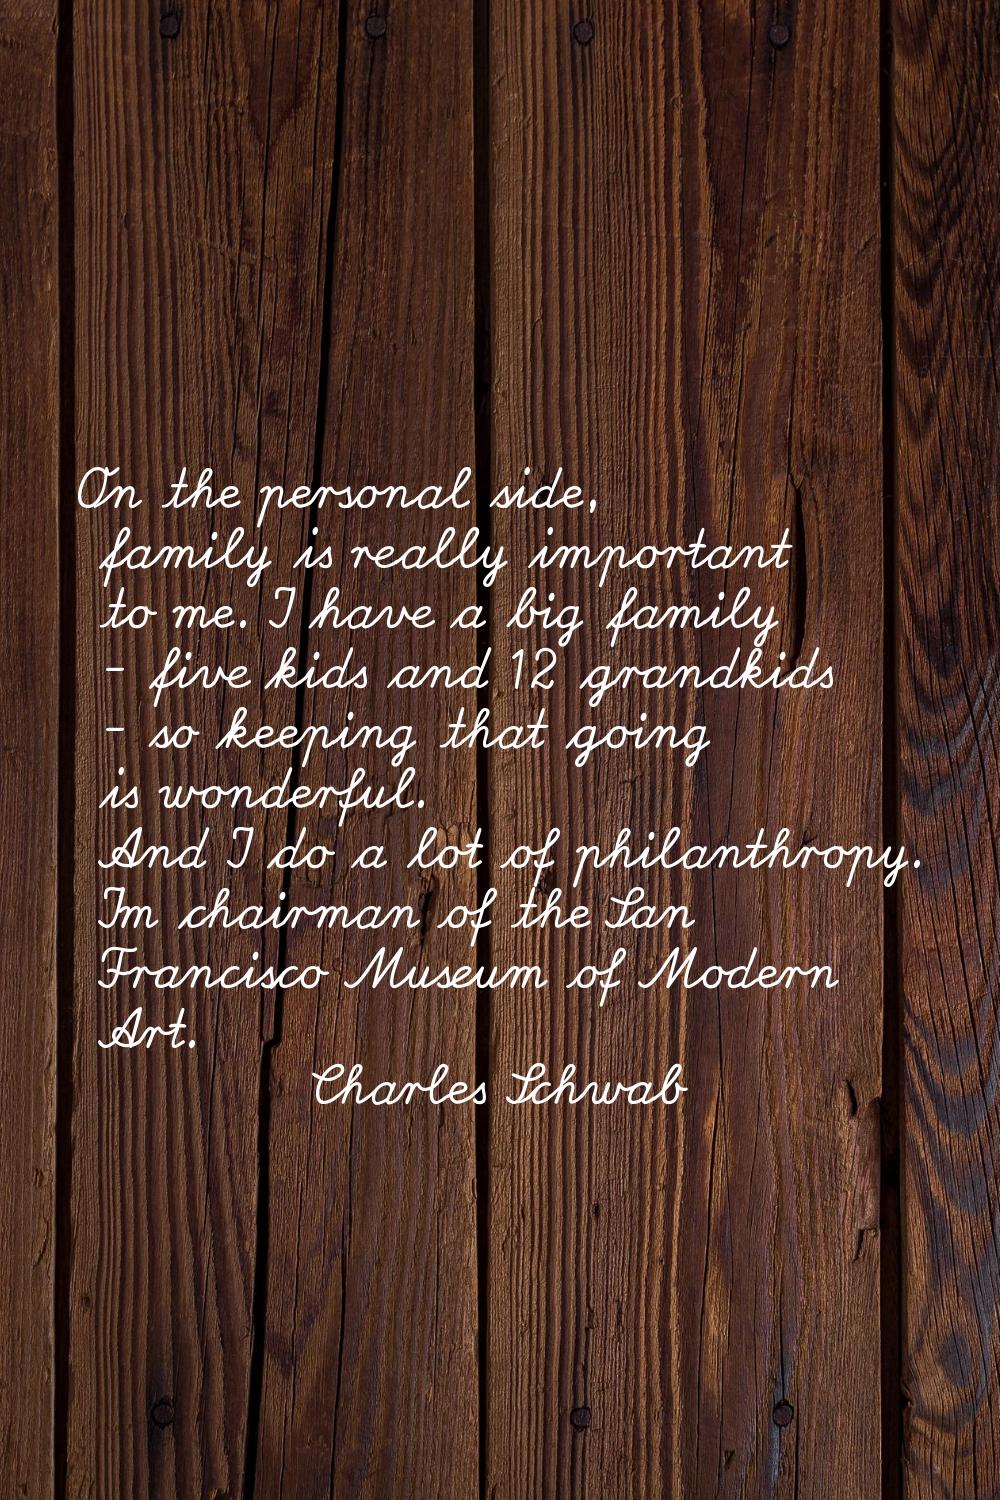 On the personal side, family is really important to me. I have a big family - five kids and 12 gran